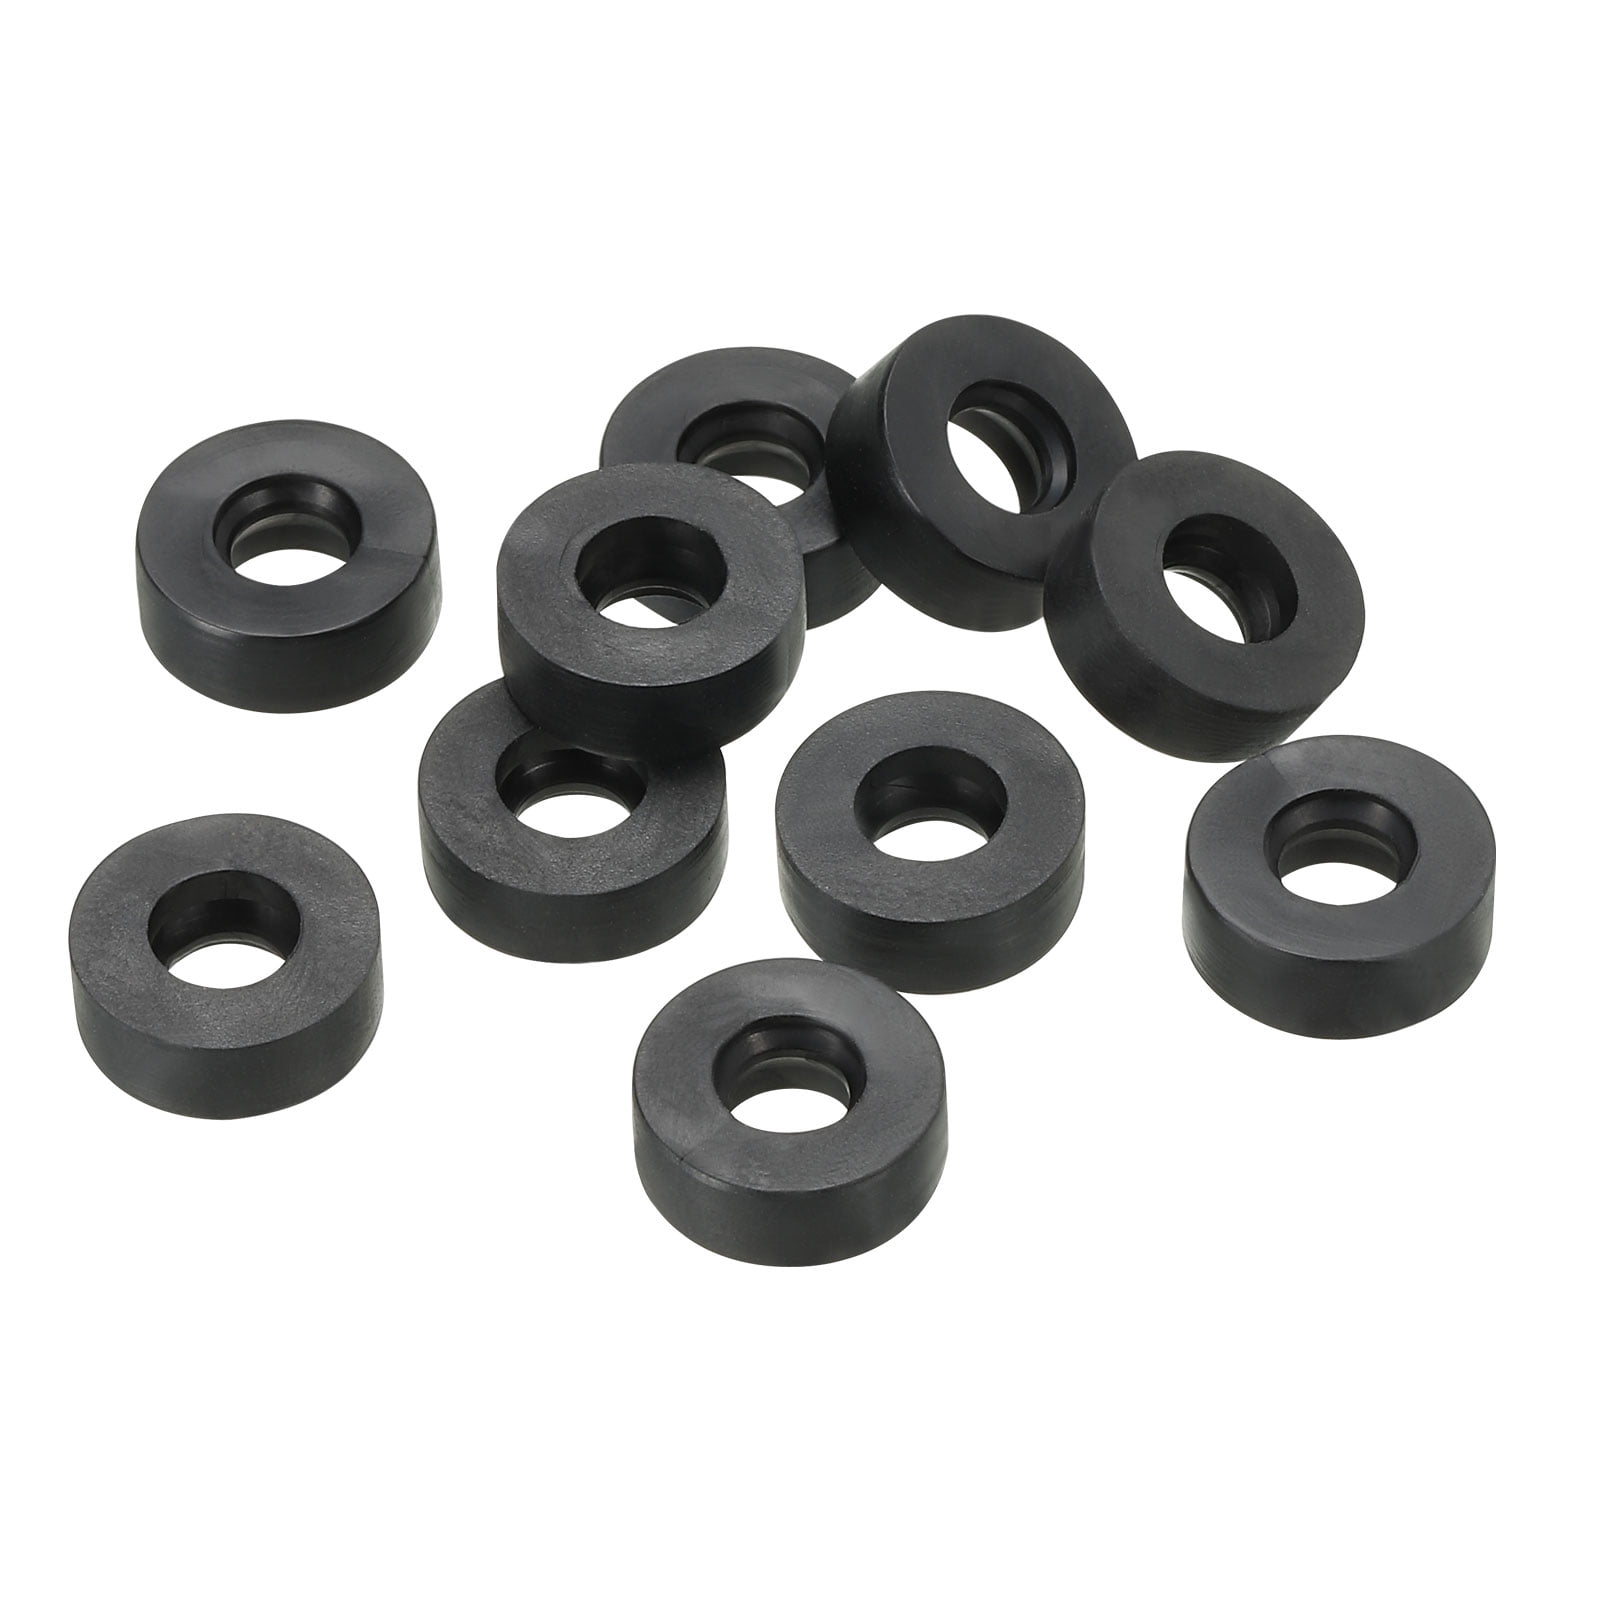 Uxcell M6 Rubber Flat Washer, 40 Pack 6mm ID 13mm OD 1.6mm Thick Sealing  Spacer Gasket Ring, Black 